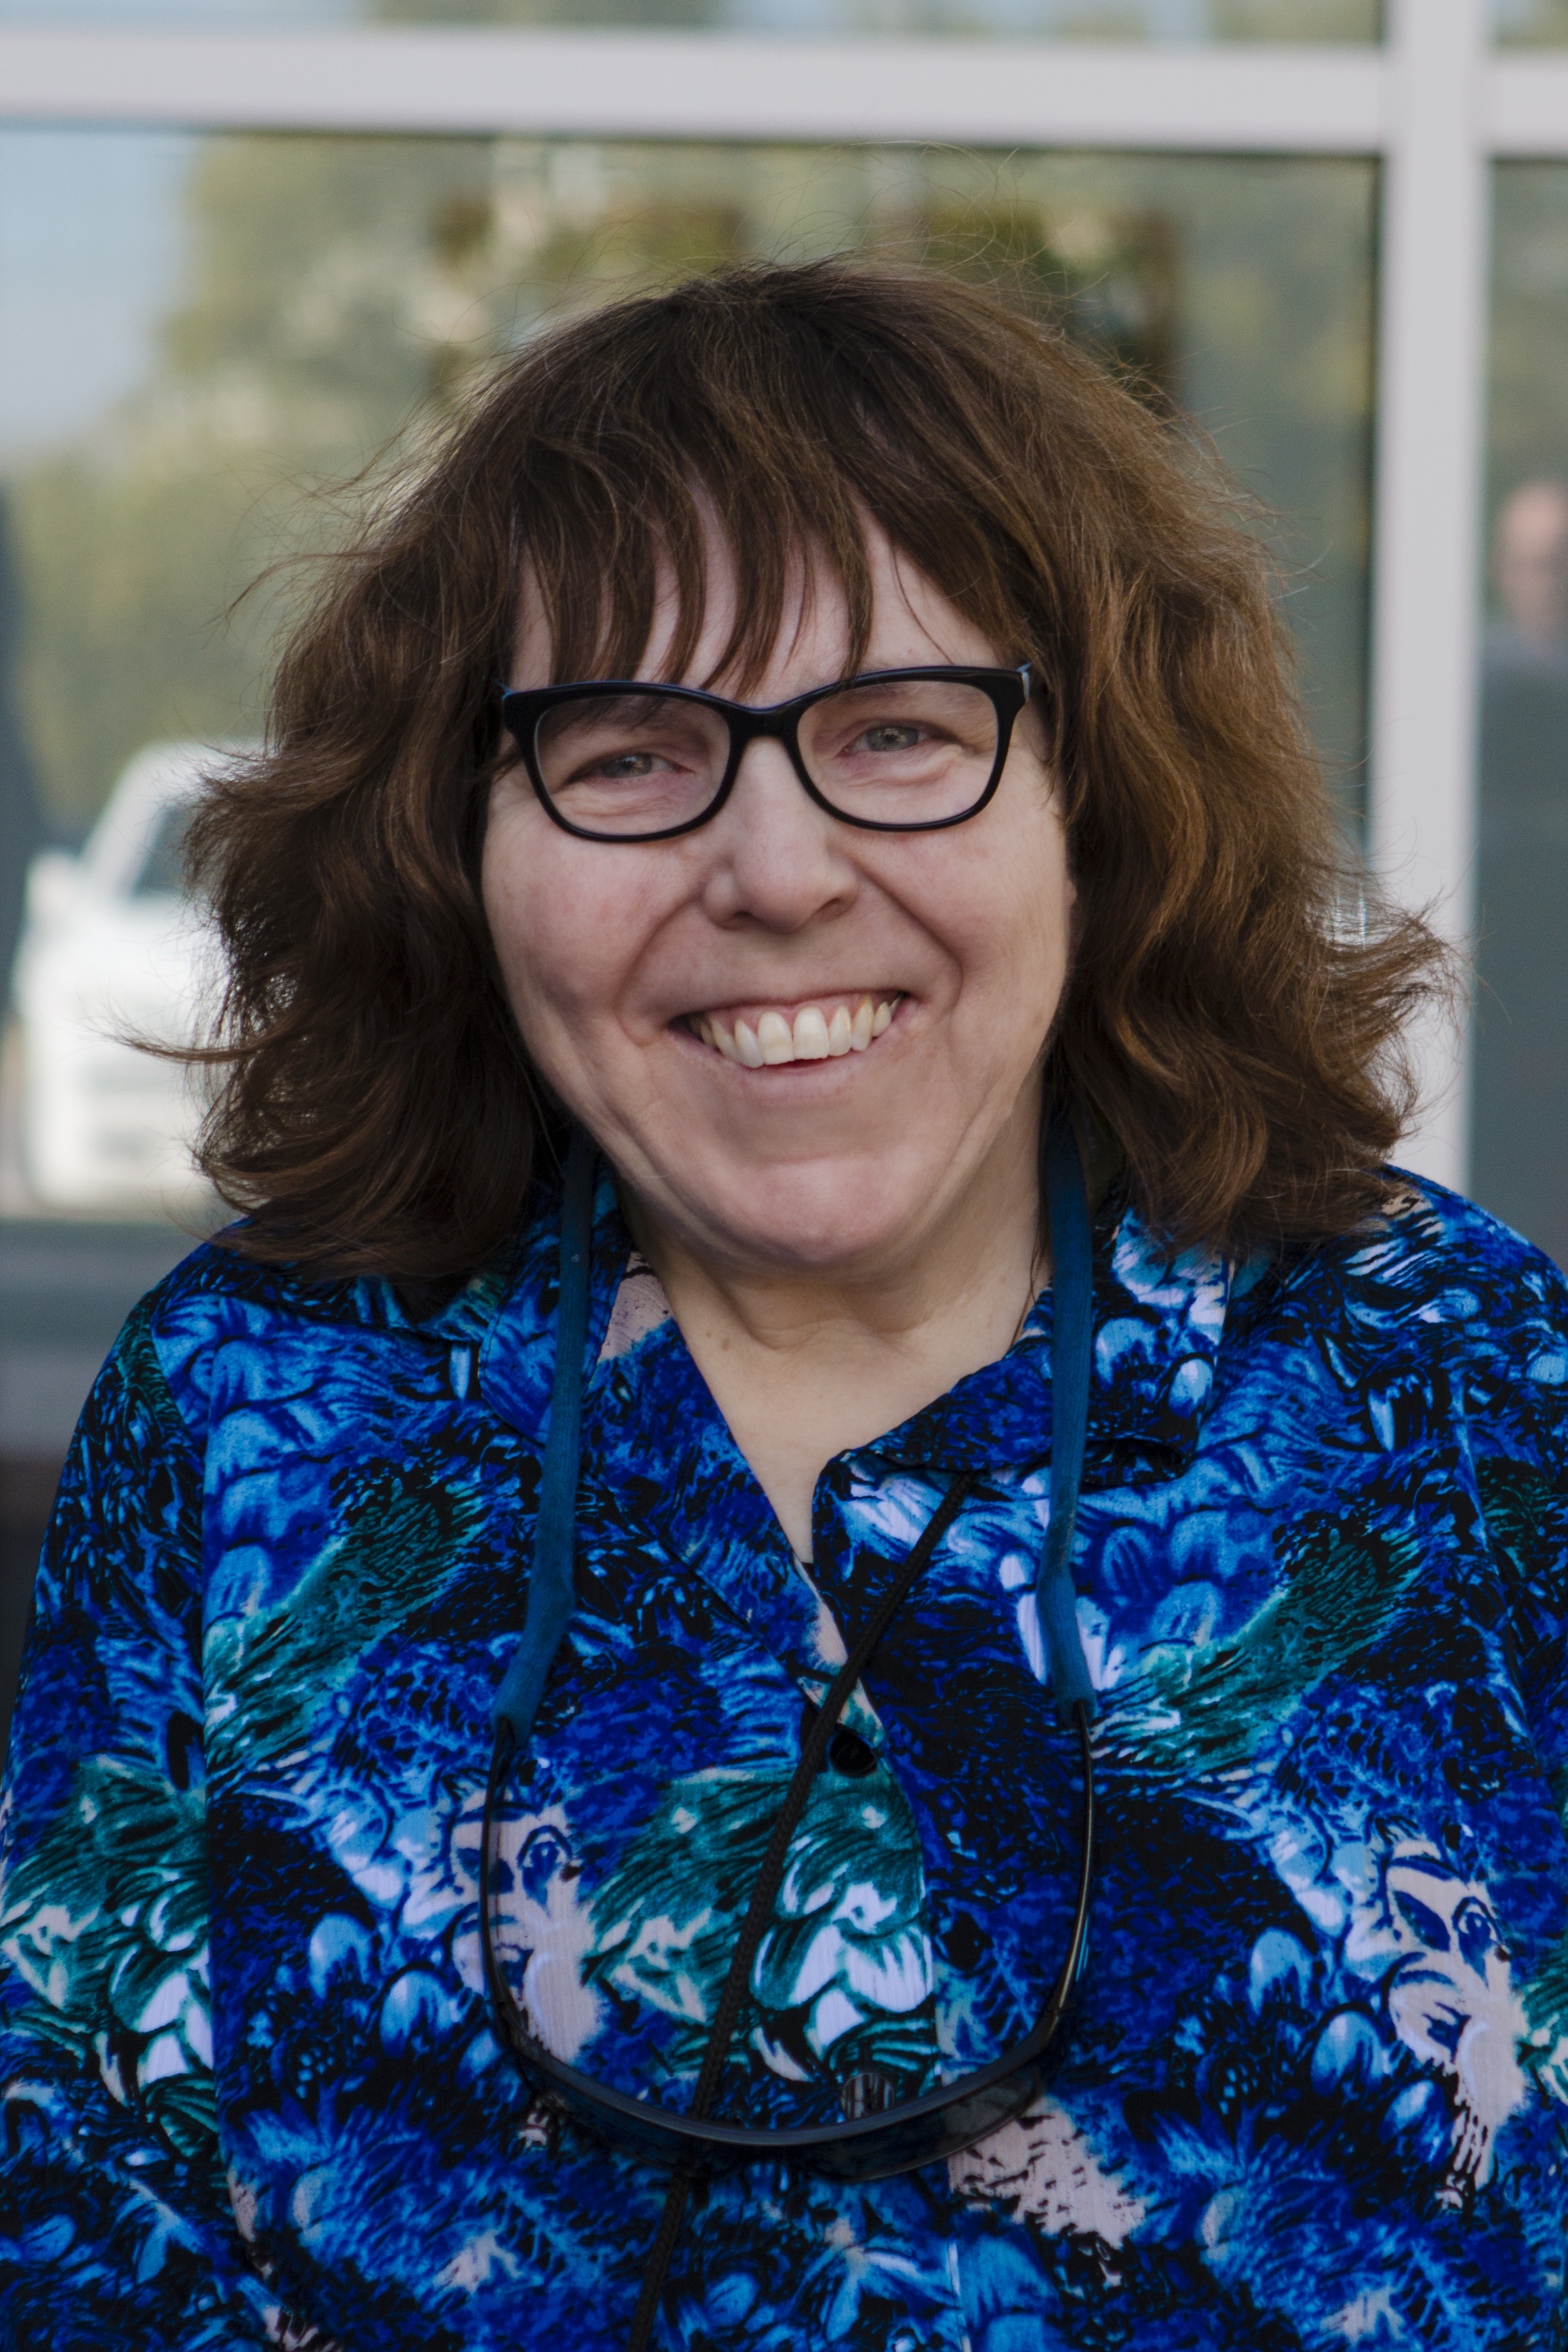 Image of Nancy Ward, a white woman with brown hair and glasses wearing a blue floral collared shirt